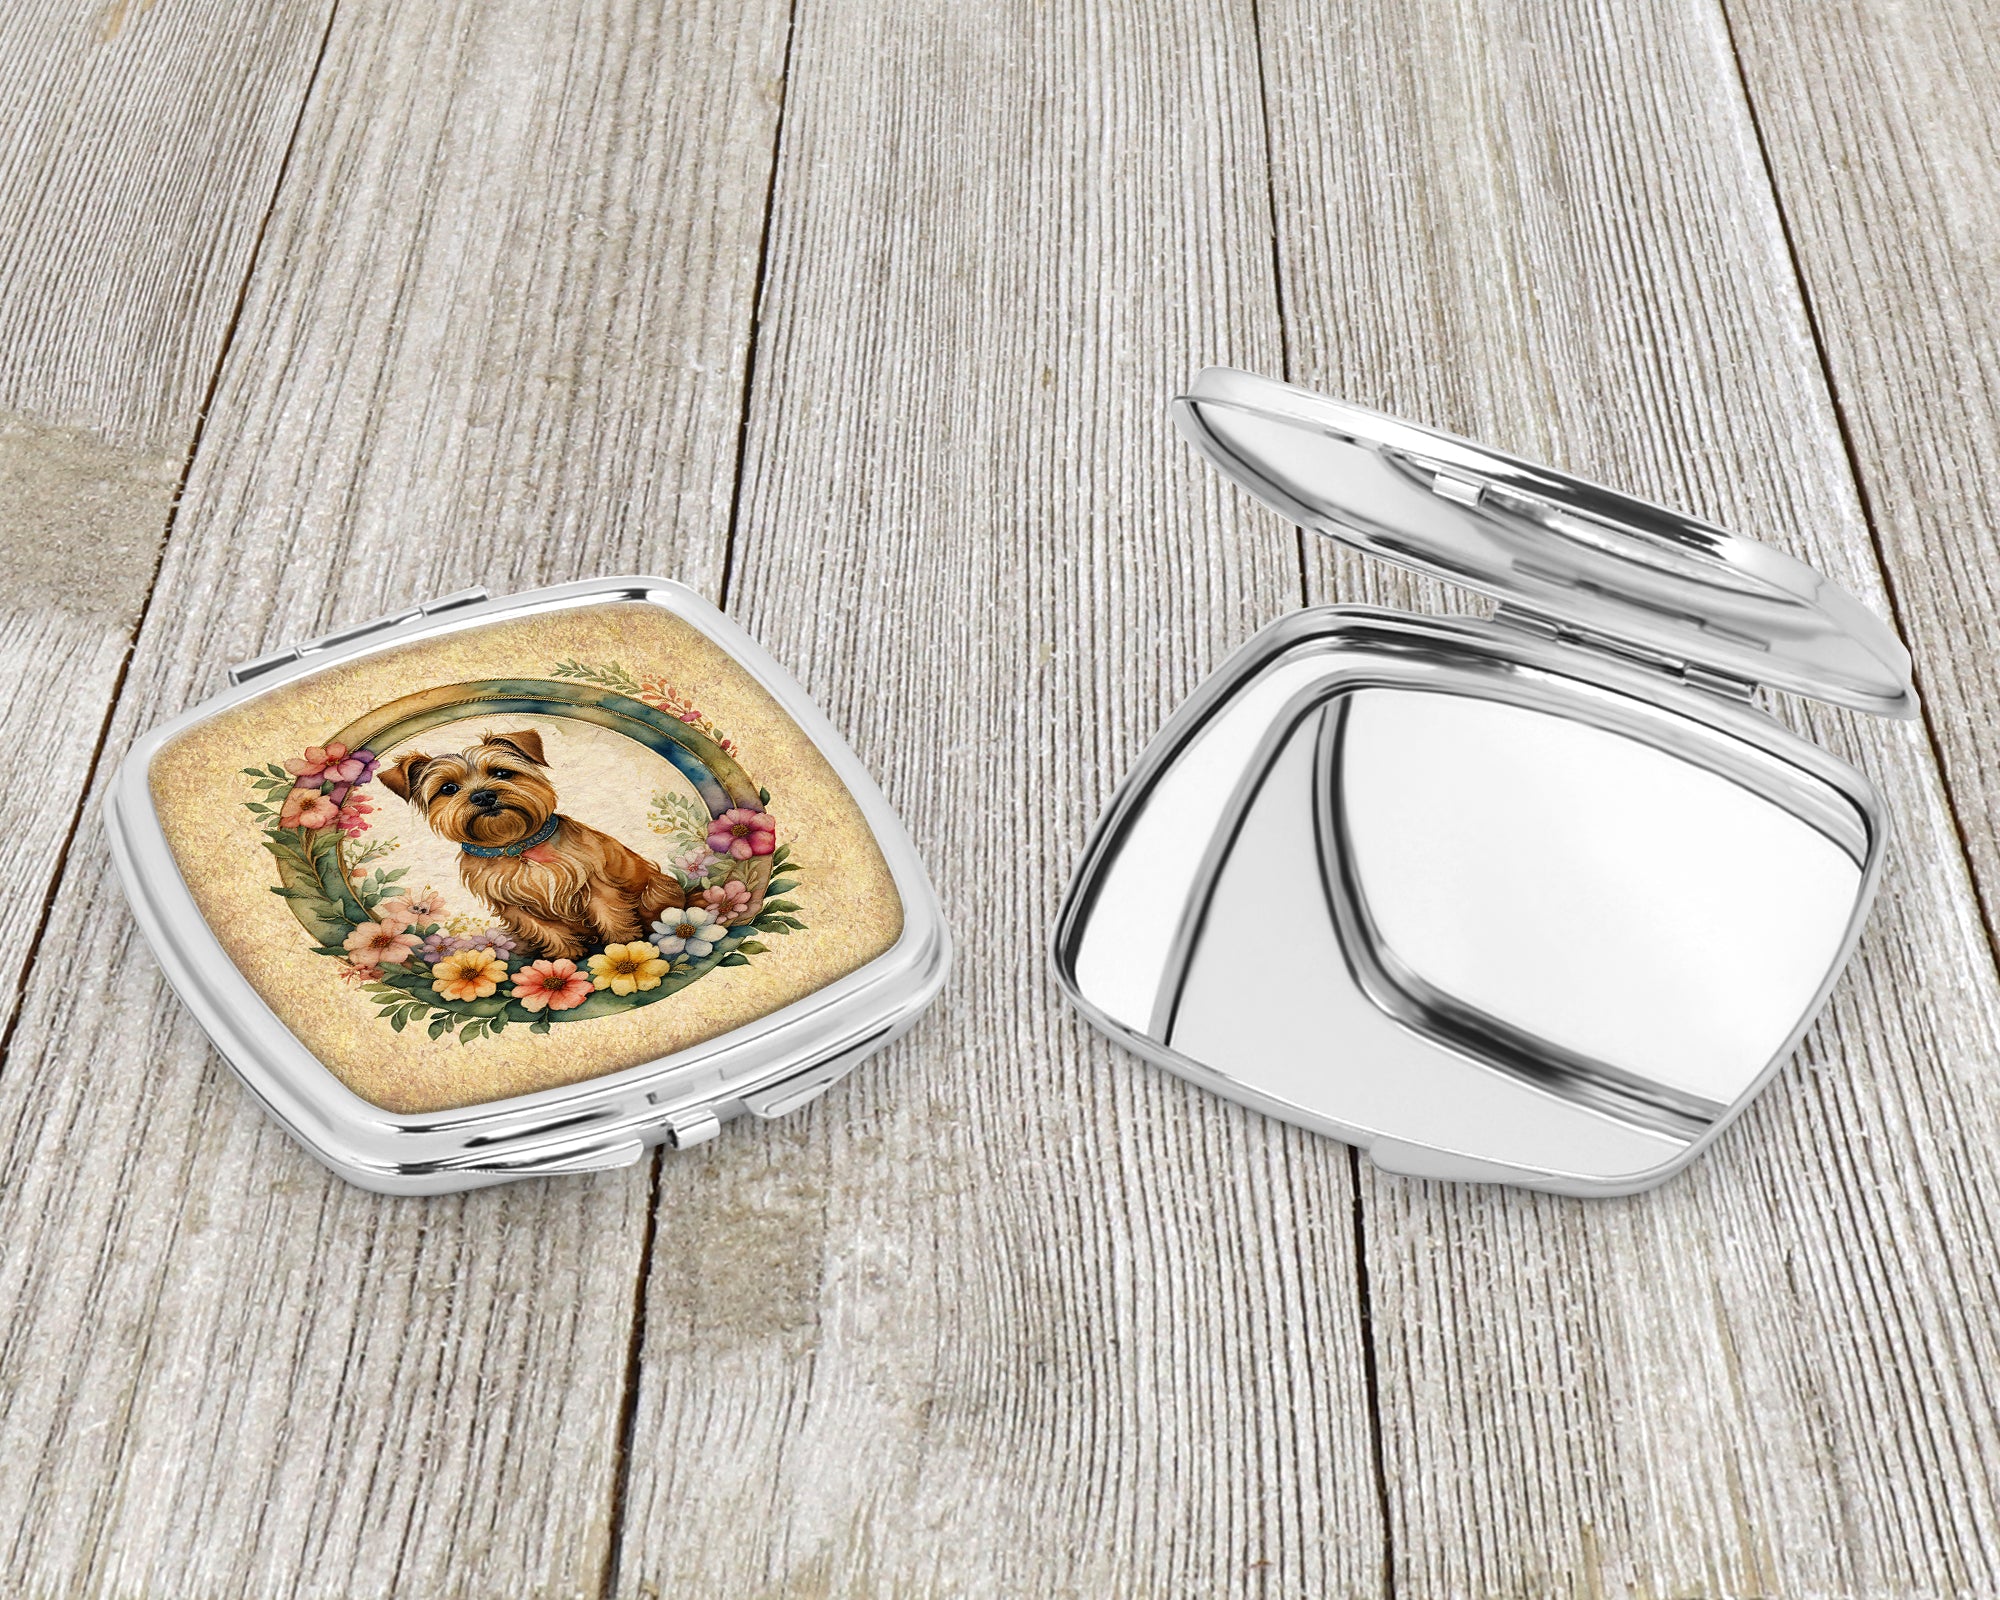 Norfolk Terrier and Flowers Compact Mirror